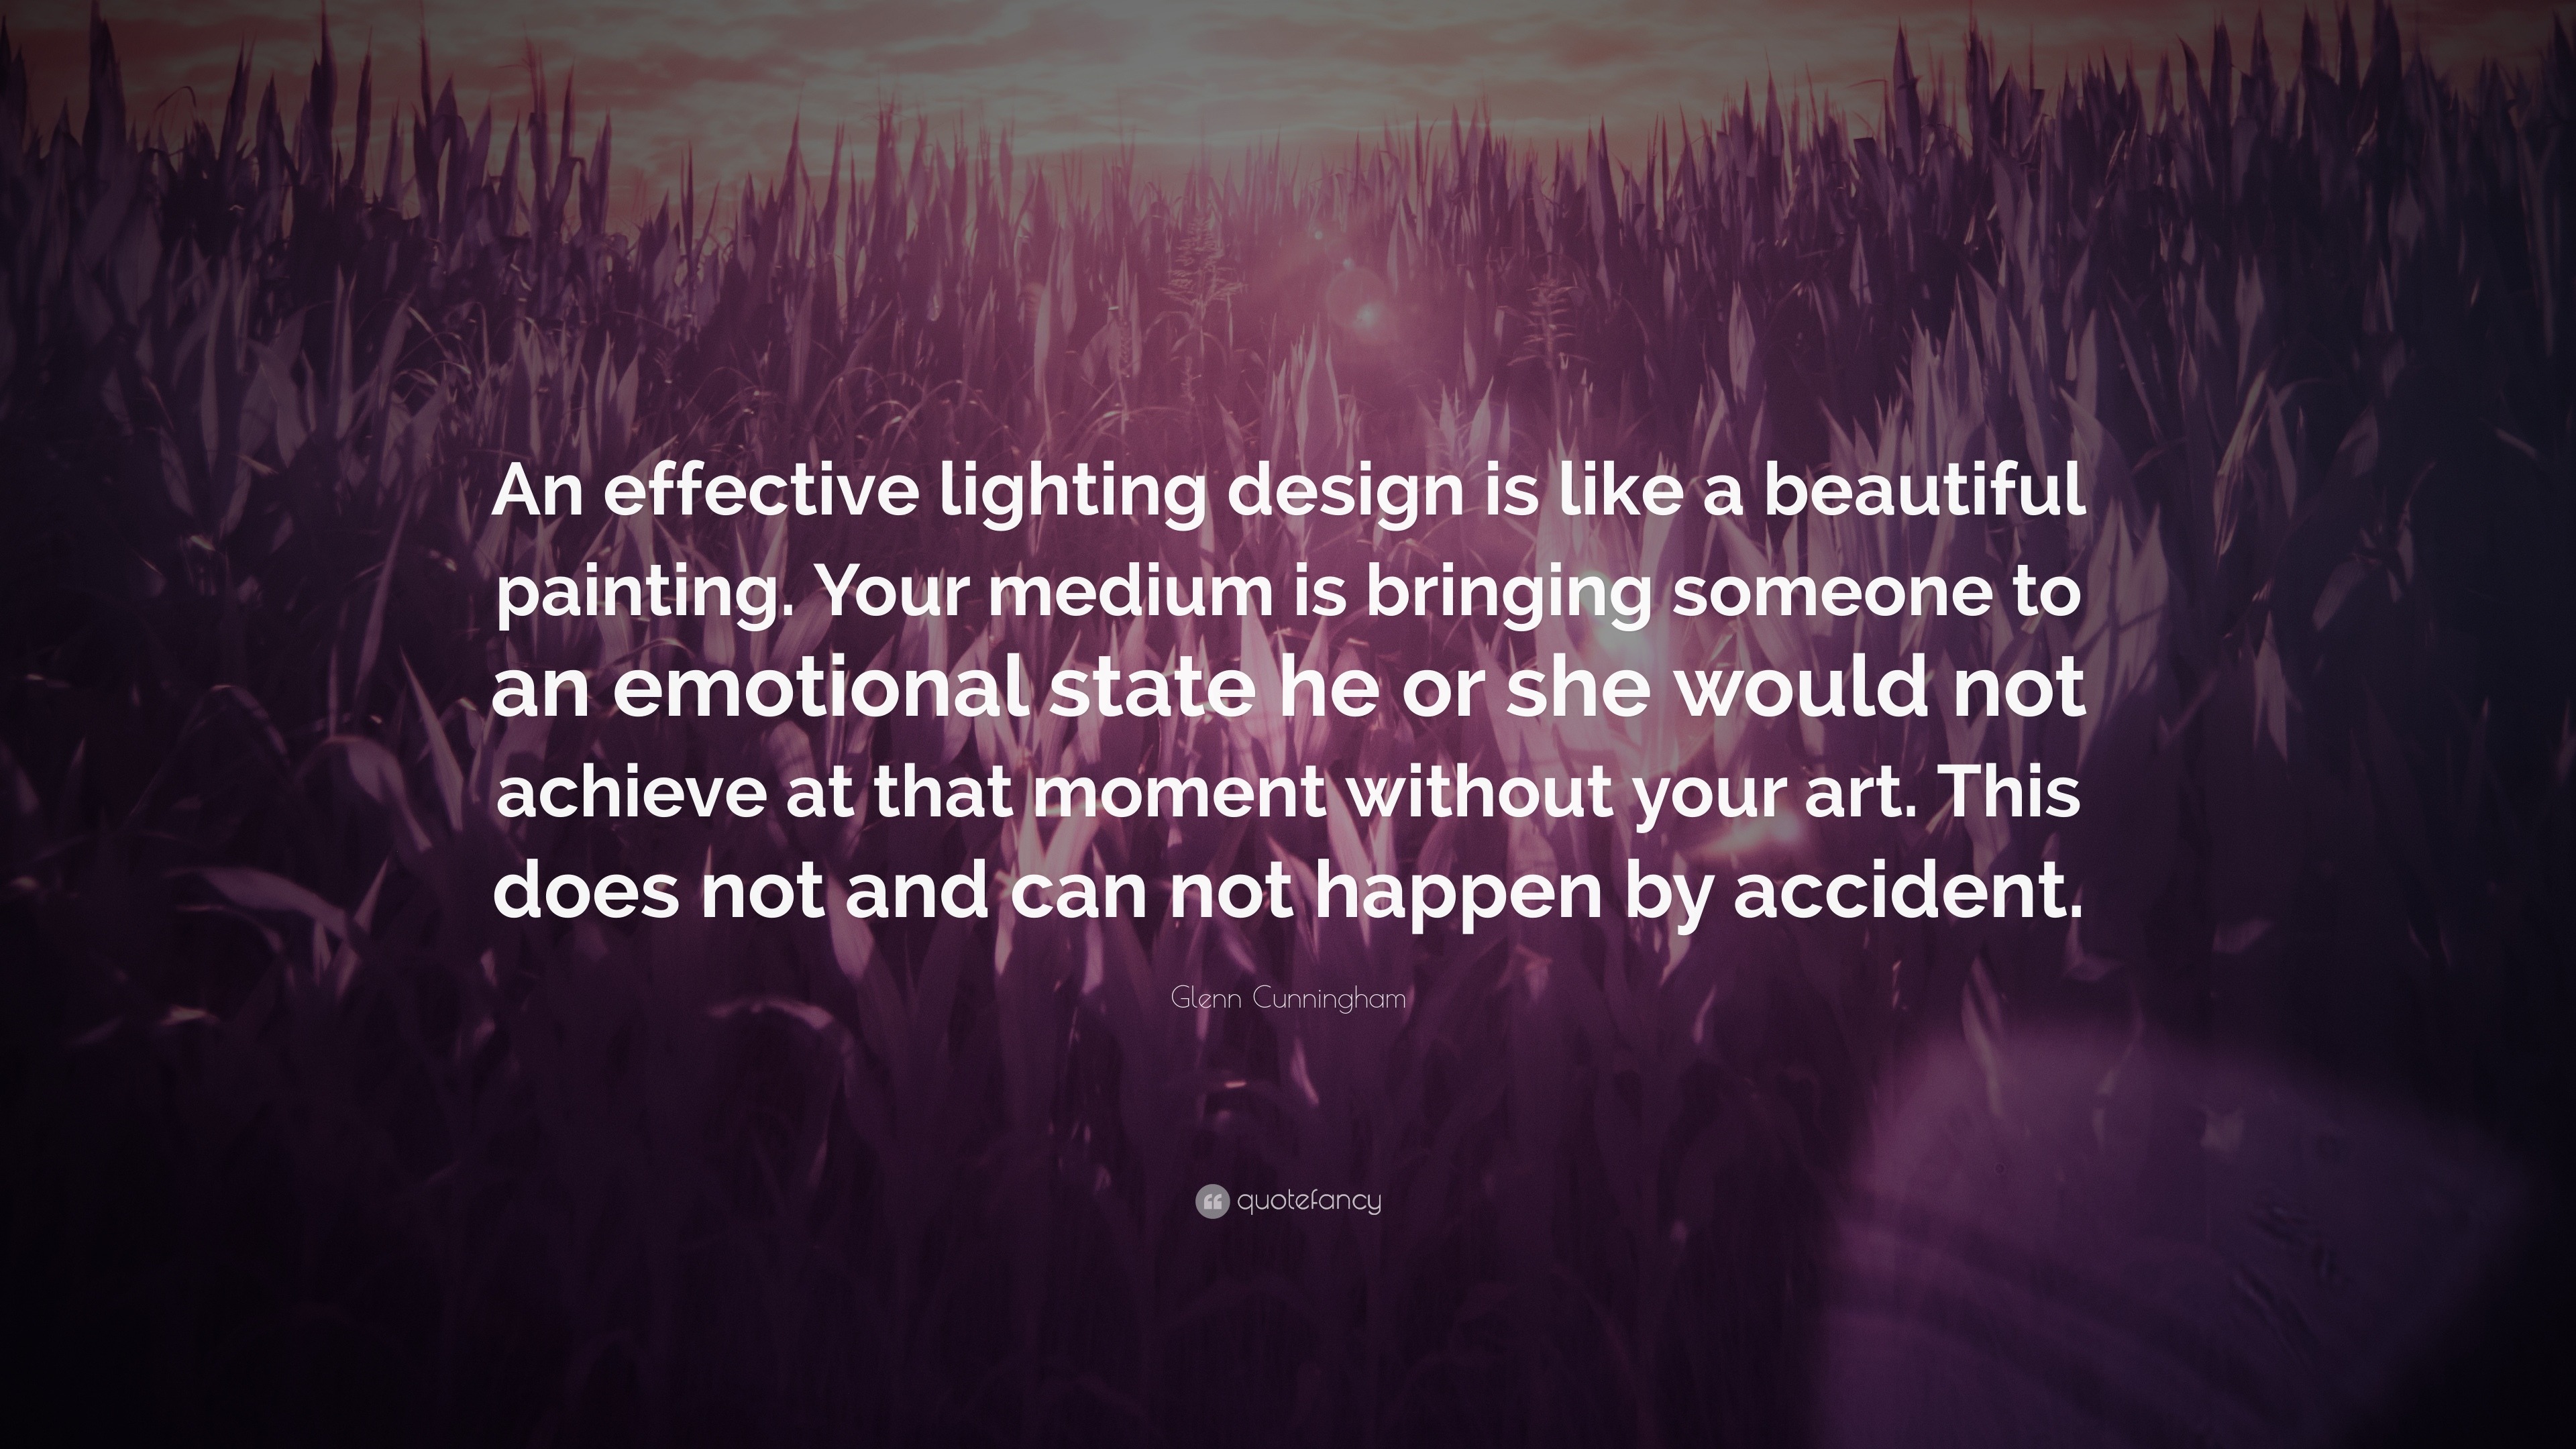 Glenn Cunningham Quote: “An effective lighting design is like a